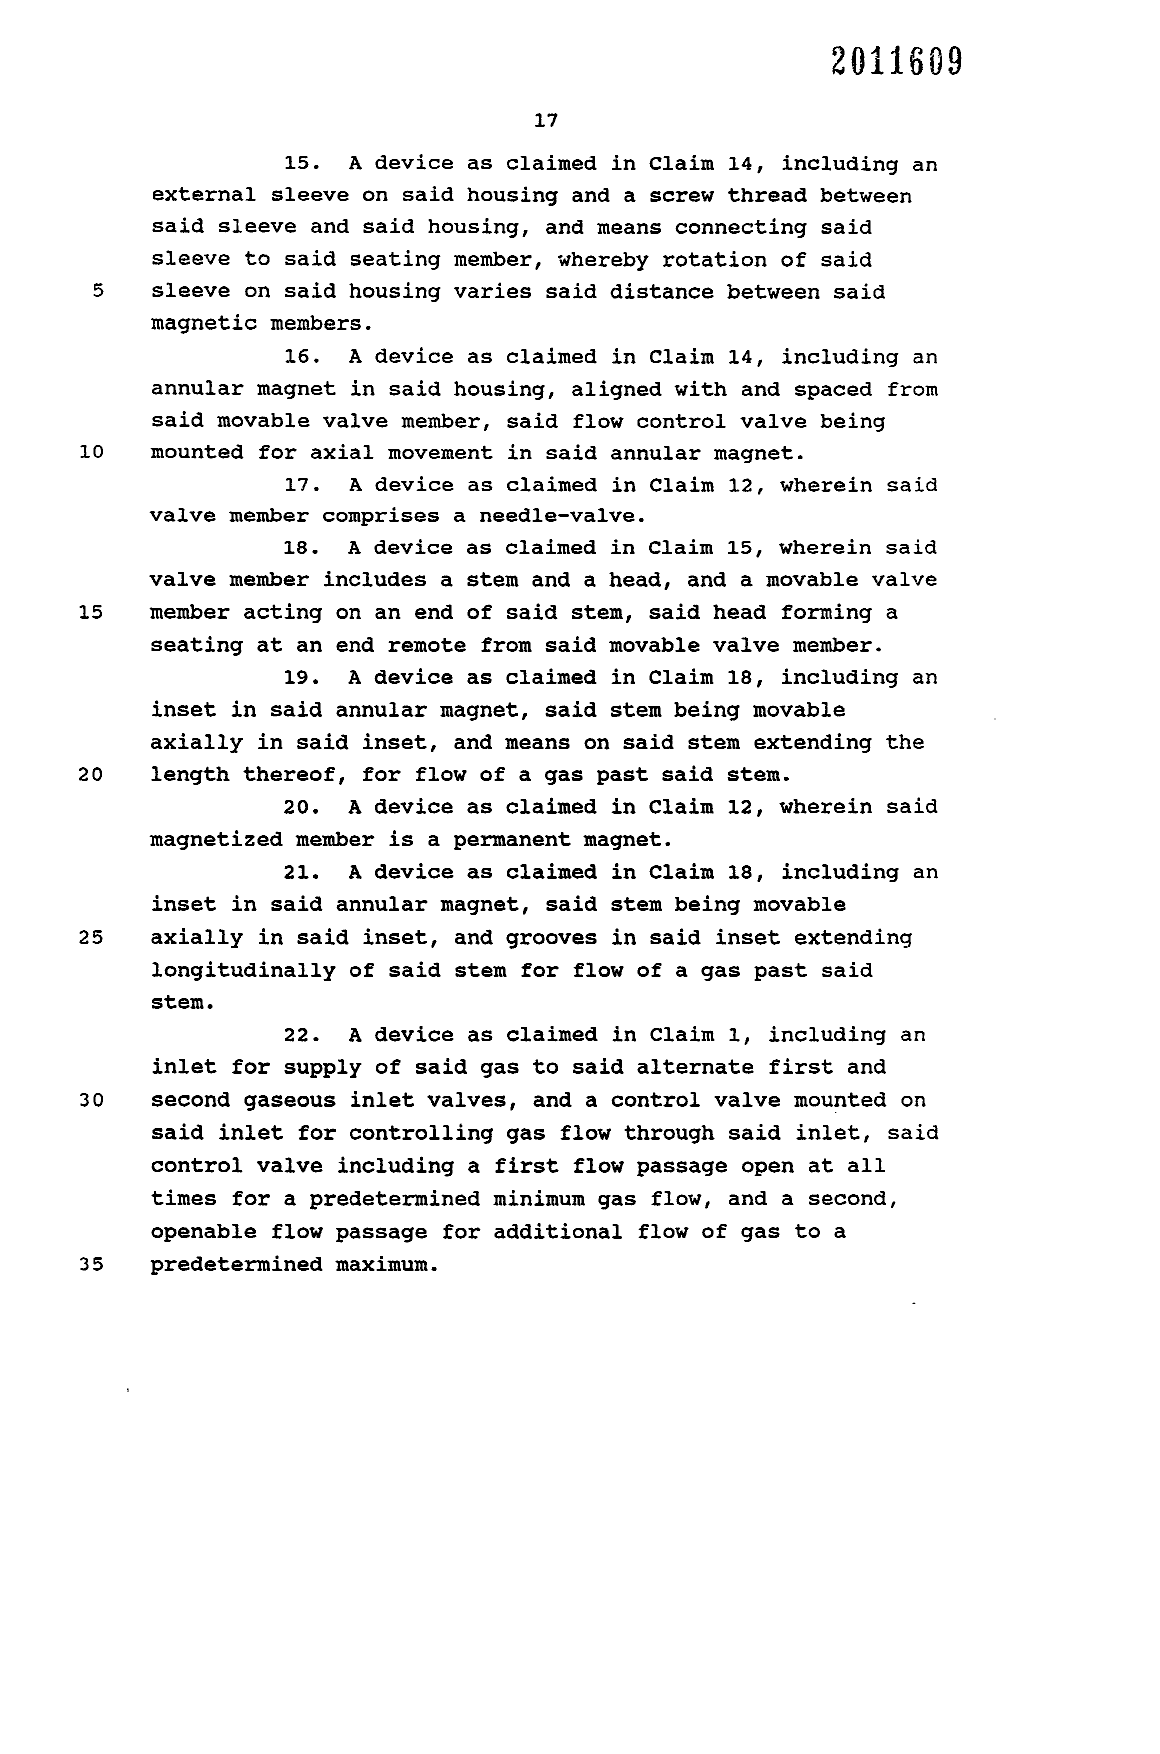 Canadian Patent Document 2011609. Claims 19921212. Image 4 of 4